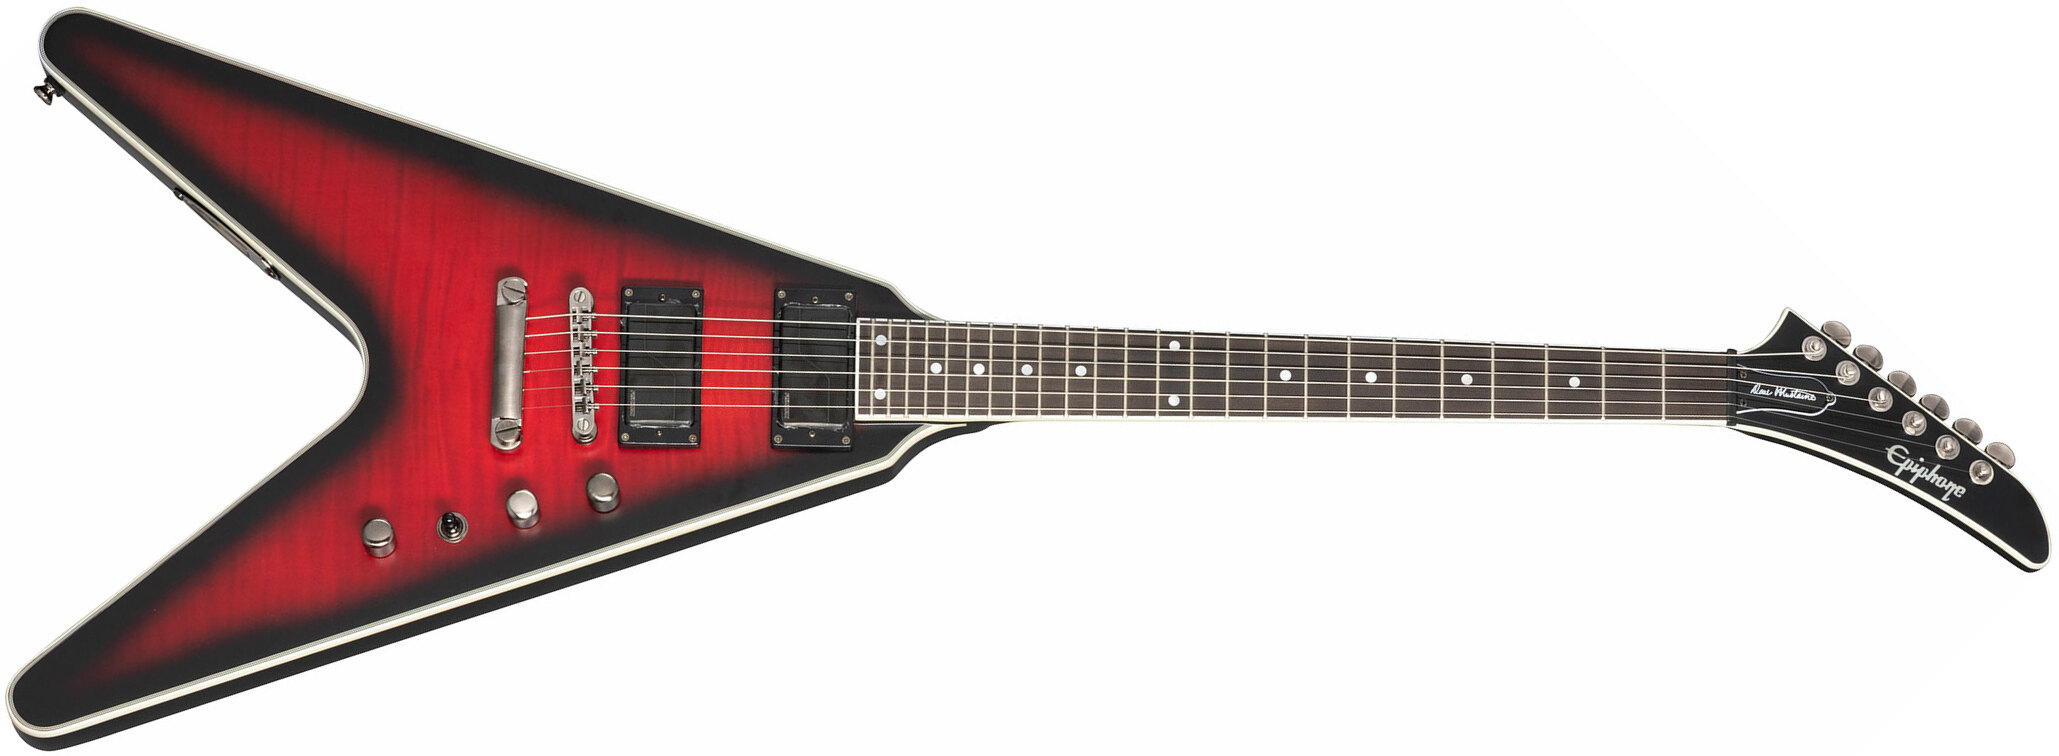 Epiphone Dave Mustaine Flying V Prophecy 2h Fishman Fluence Ht Eb - Aged Dark Red Burst - E-Gitarre aus Metall - Main picture